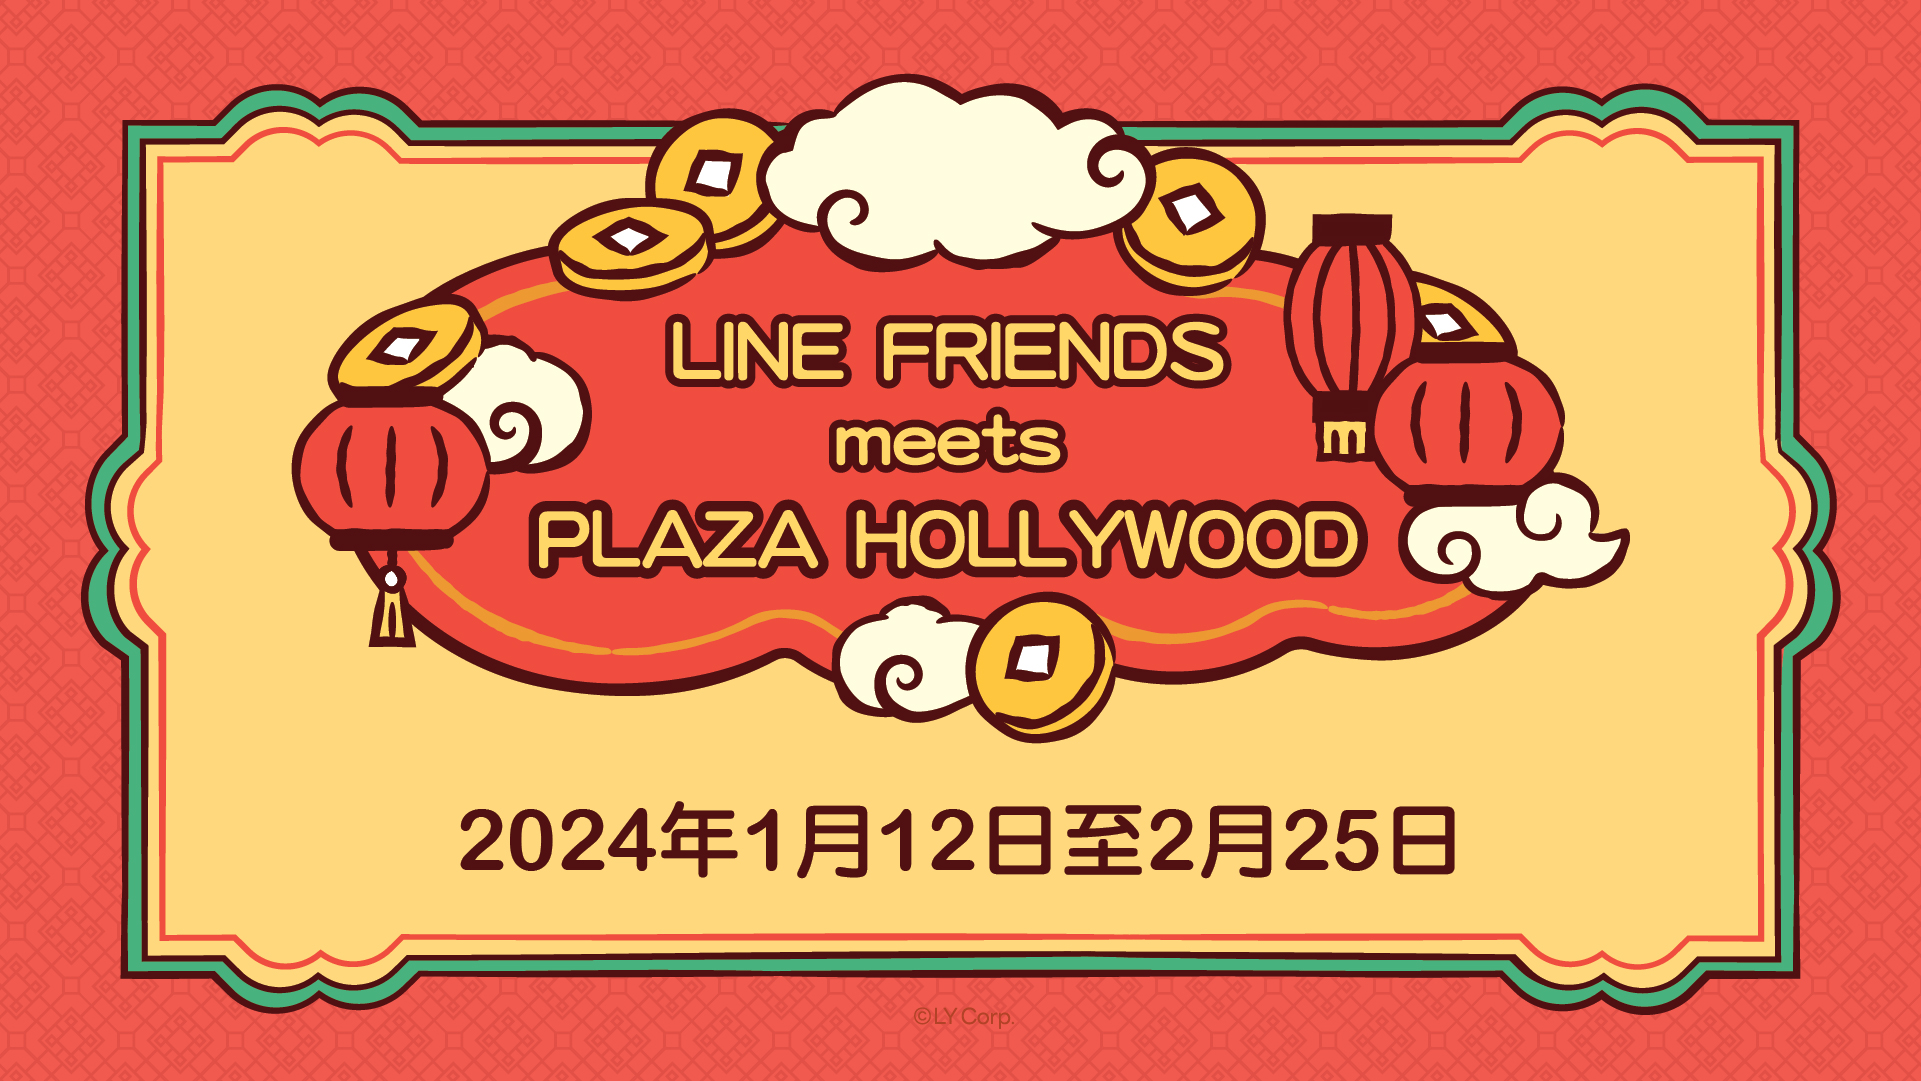 LIINE FRIENDS meets PLAZA HOLLYWOOD